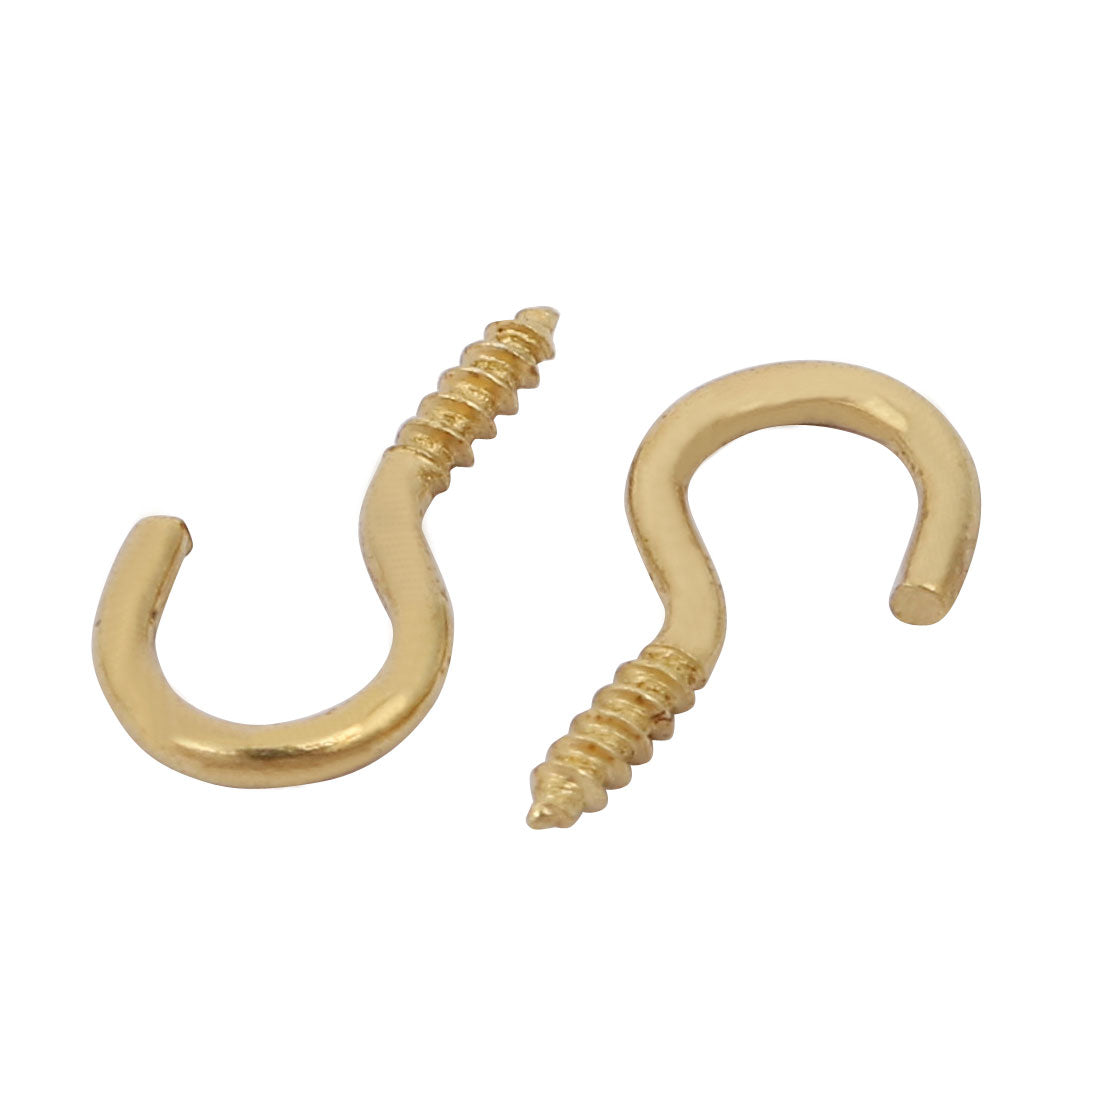 uxcell Uxcell 1.9mm Dia Thread 16mm Length Iron Brass Plated Self-Tapping Screw Hook 100pcs